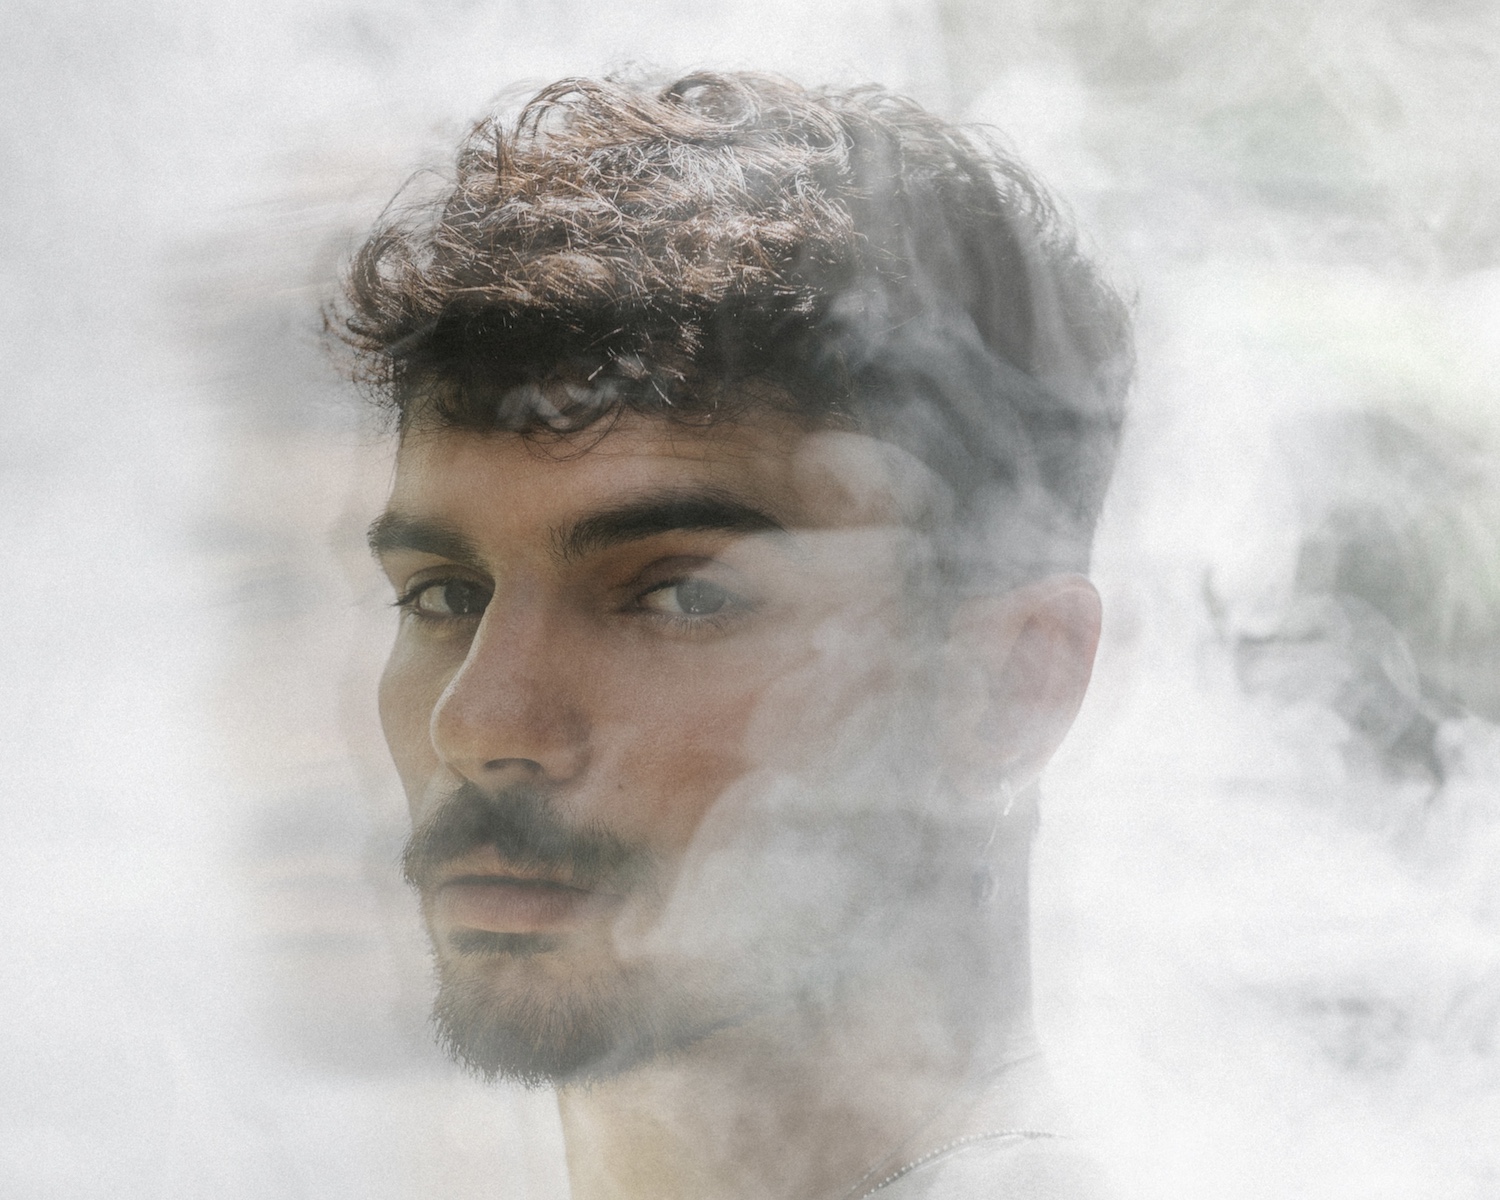 Bákayan Debuts on Stil vor Talent with Three-Track ‘Fireflies’ Release